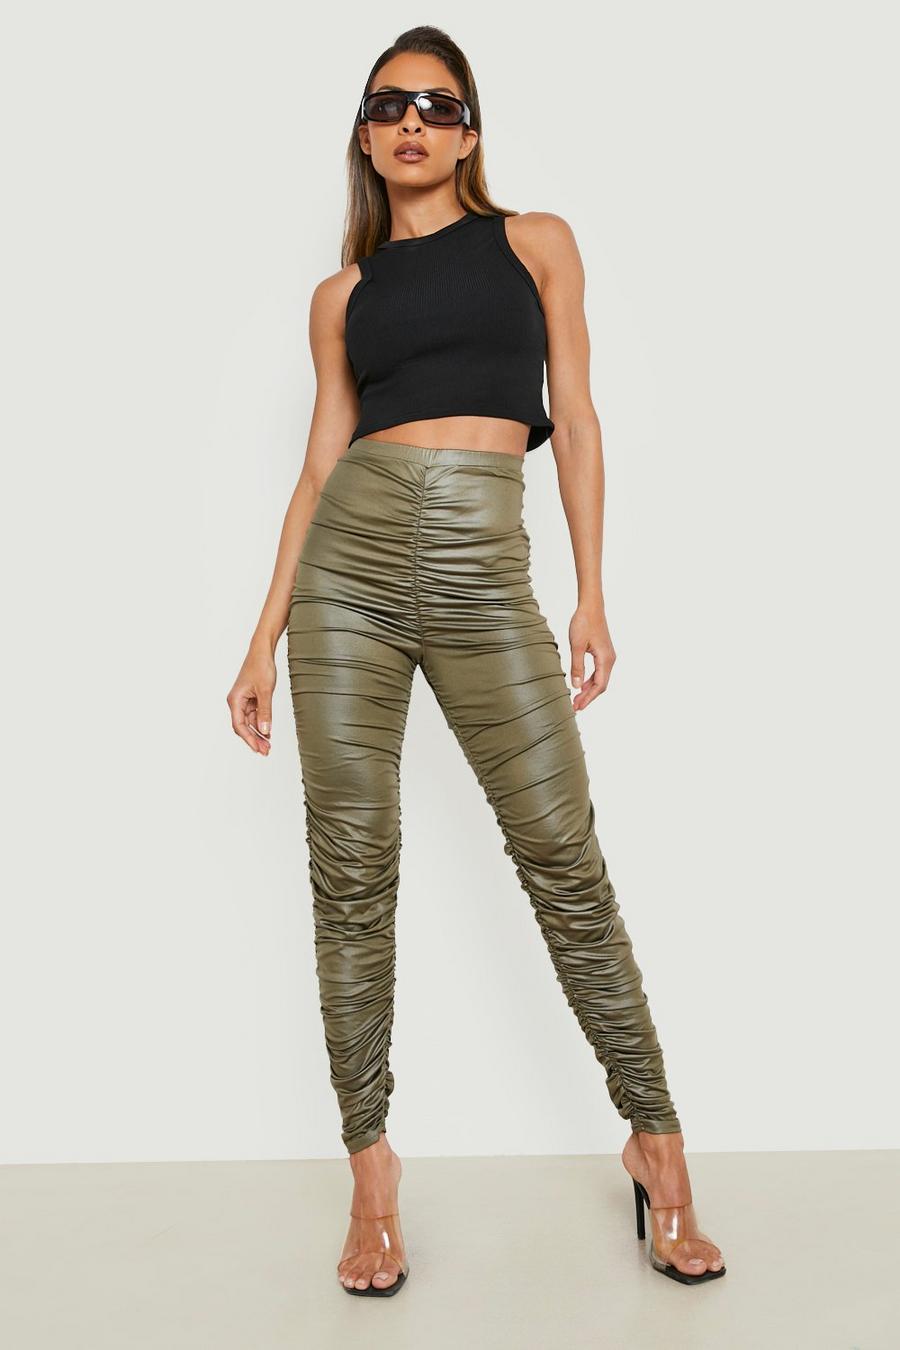 Khaki Leather Look Ruched Leggings image number 1